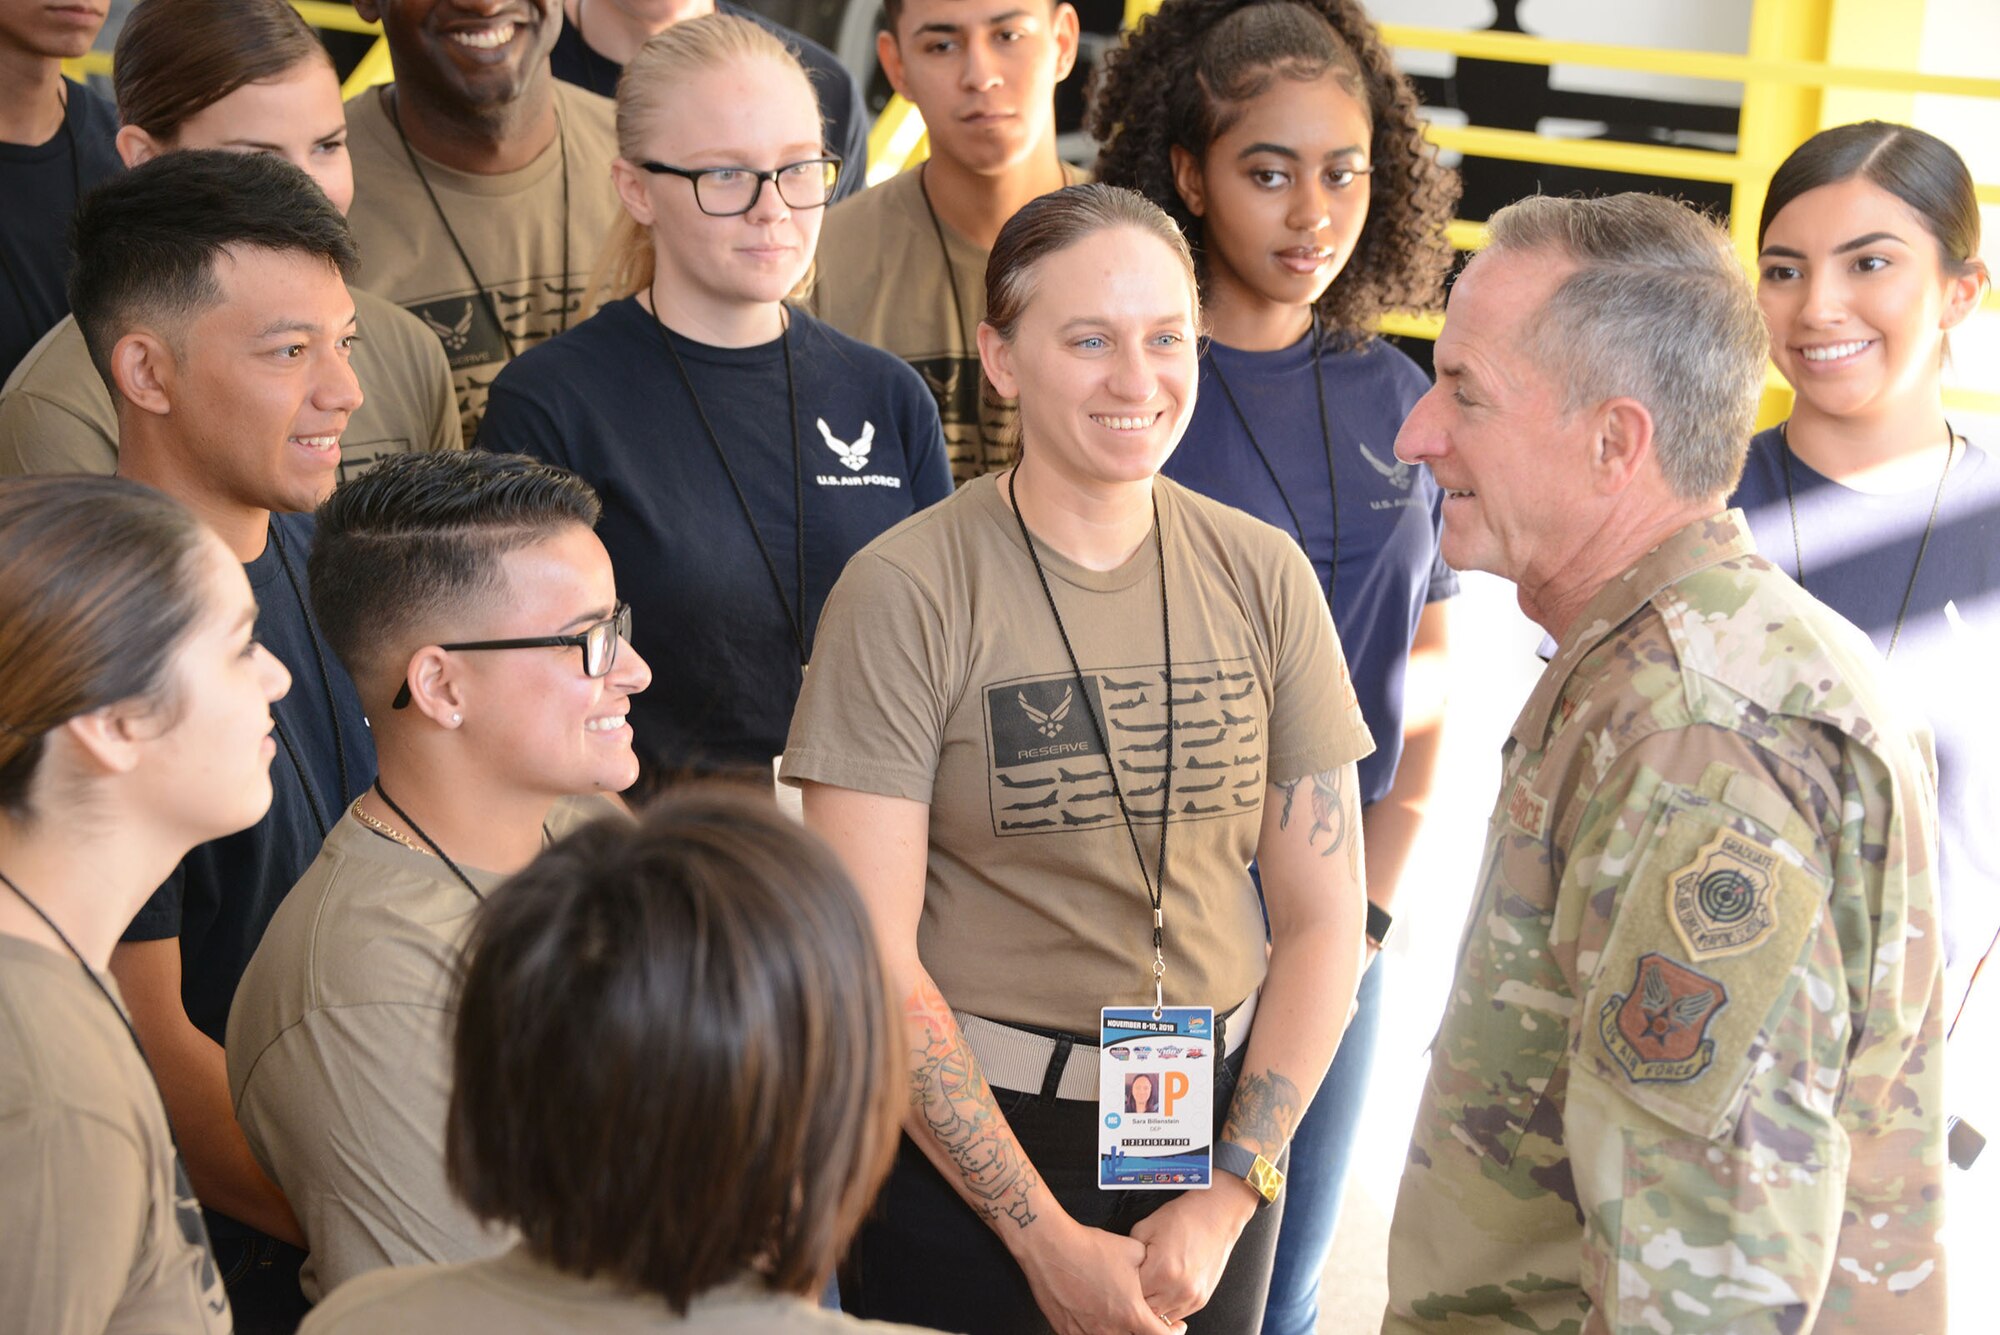 Gen. David. L. Goldfein, the Air Force chief of staff, talks to a group of 20 soon to be Airmen during the Bluegreen Vacations 500 NASCAR race in Phoenix